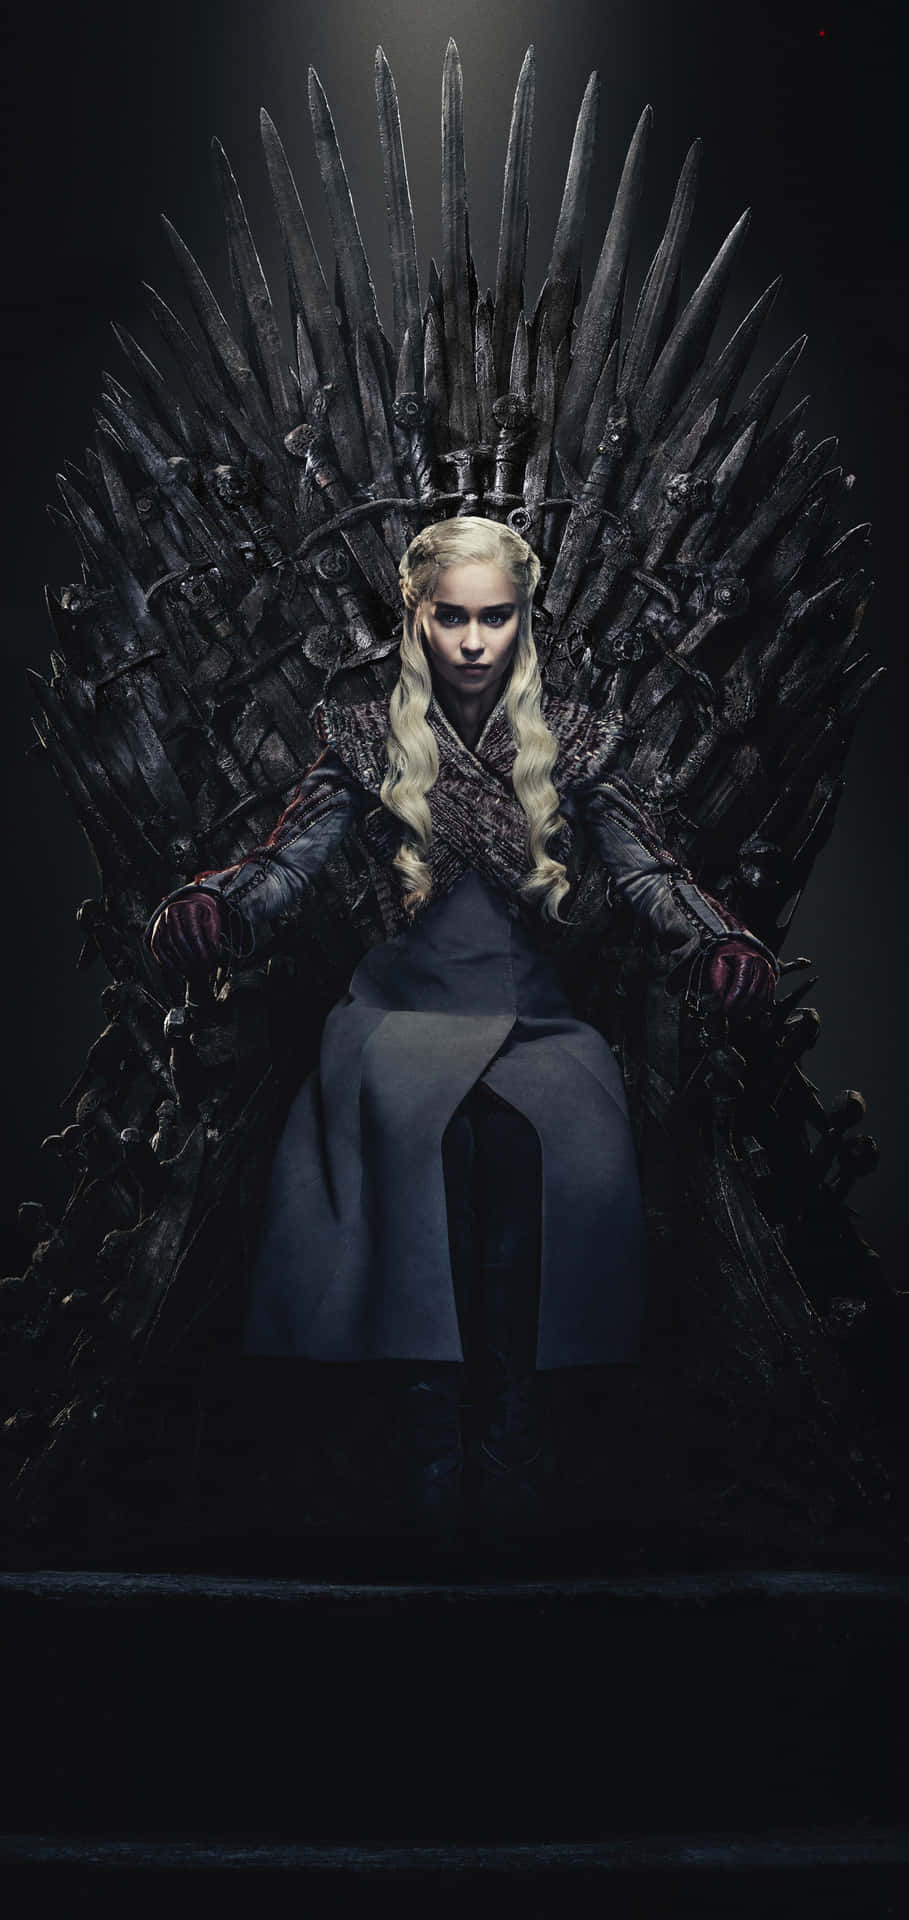 A Woman Sitting On The Iron Throne